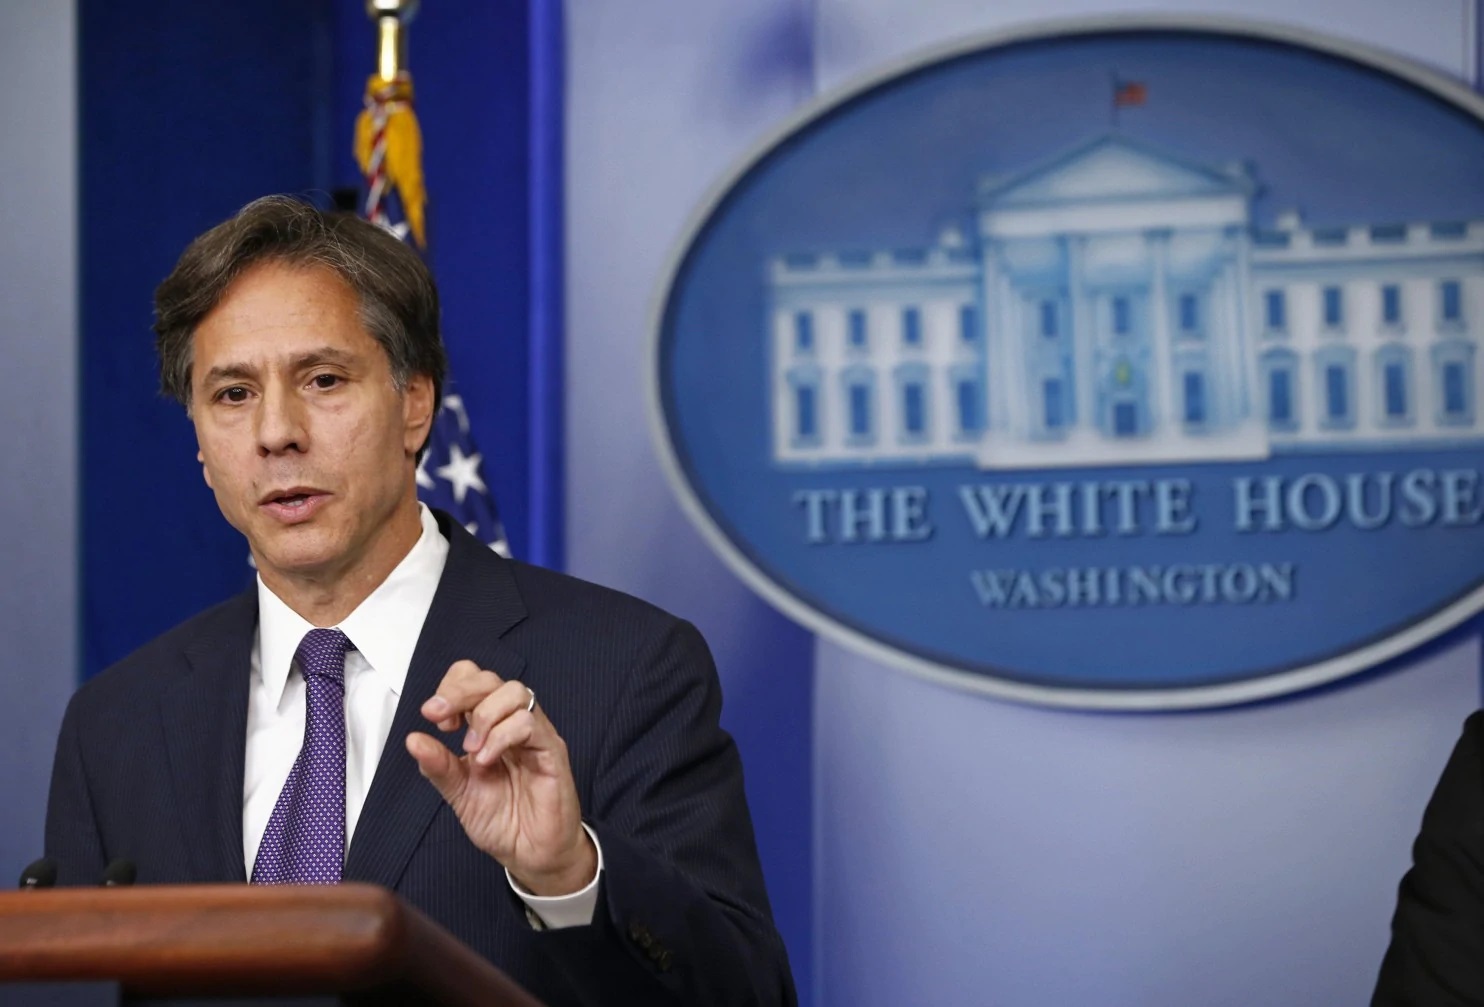 Blinken cautious of Russia, China, concerned of Iran, North Korea nuclear power 